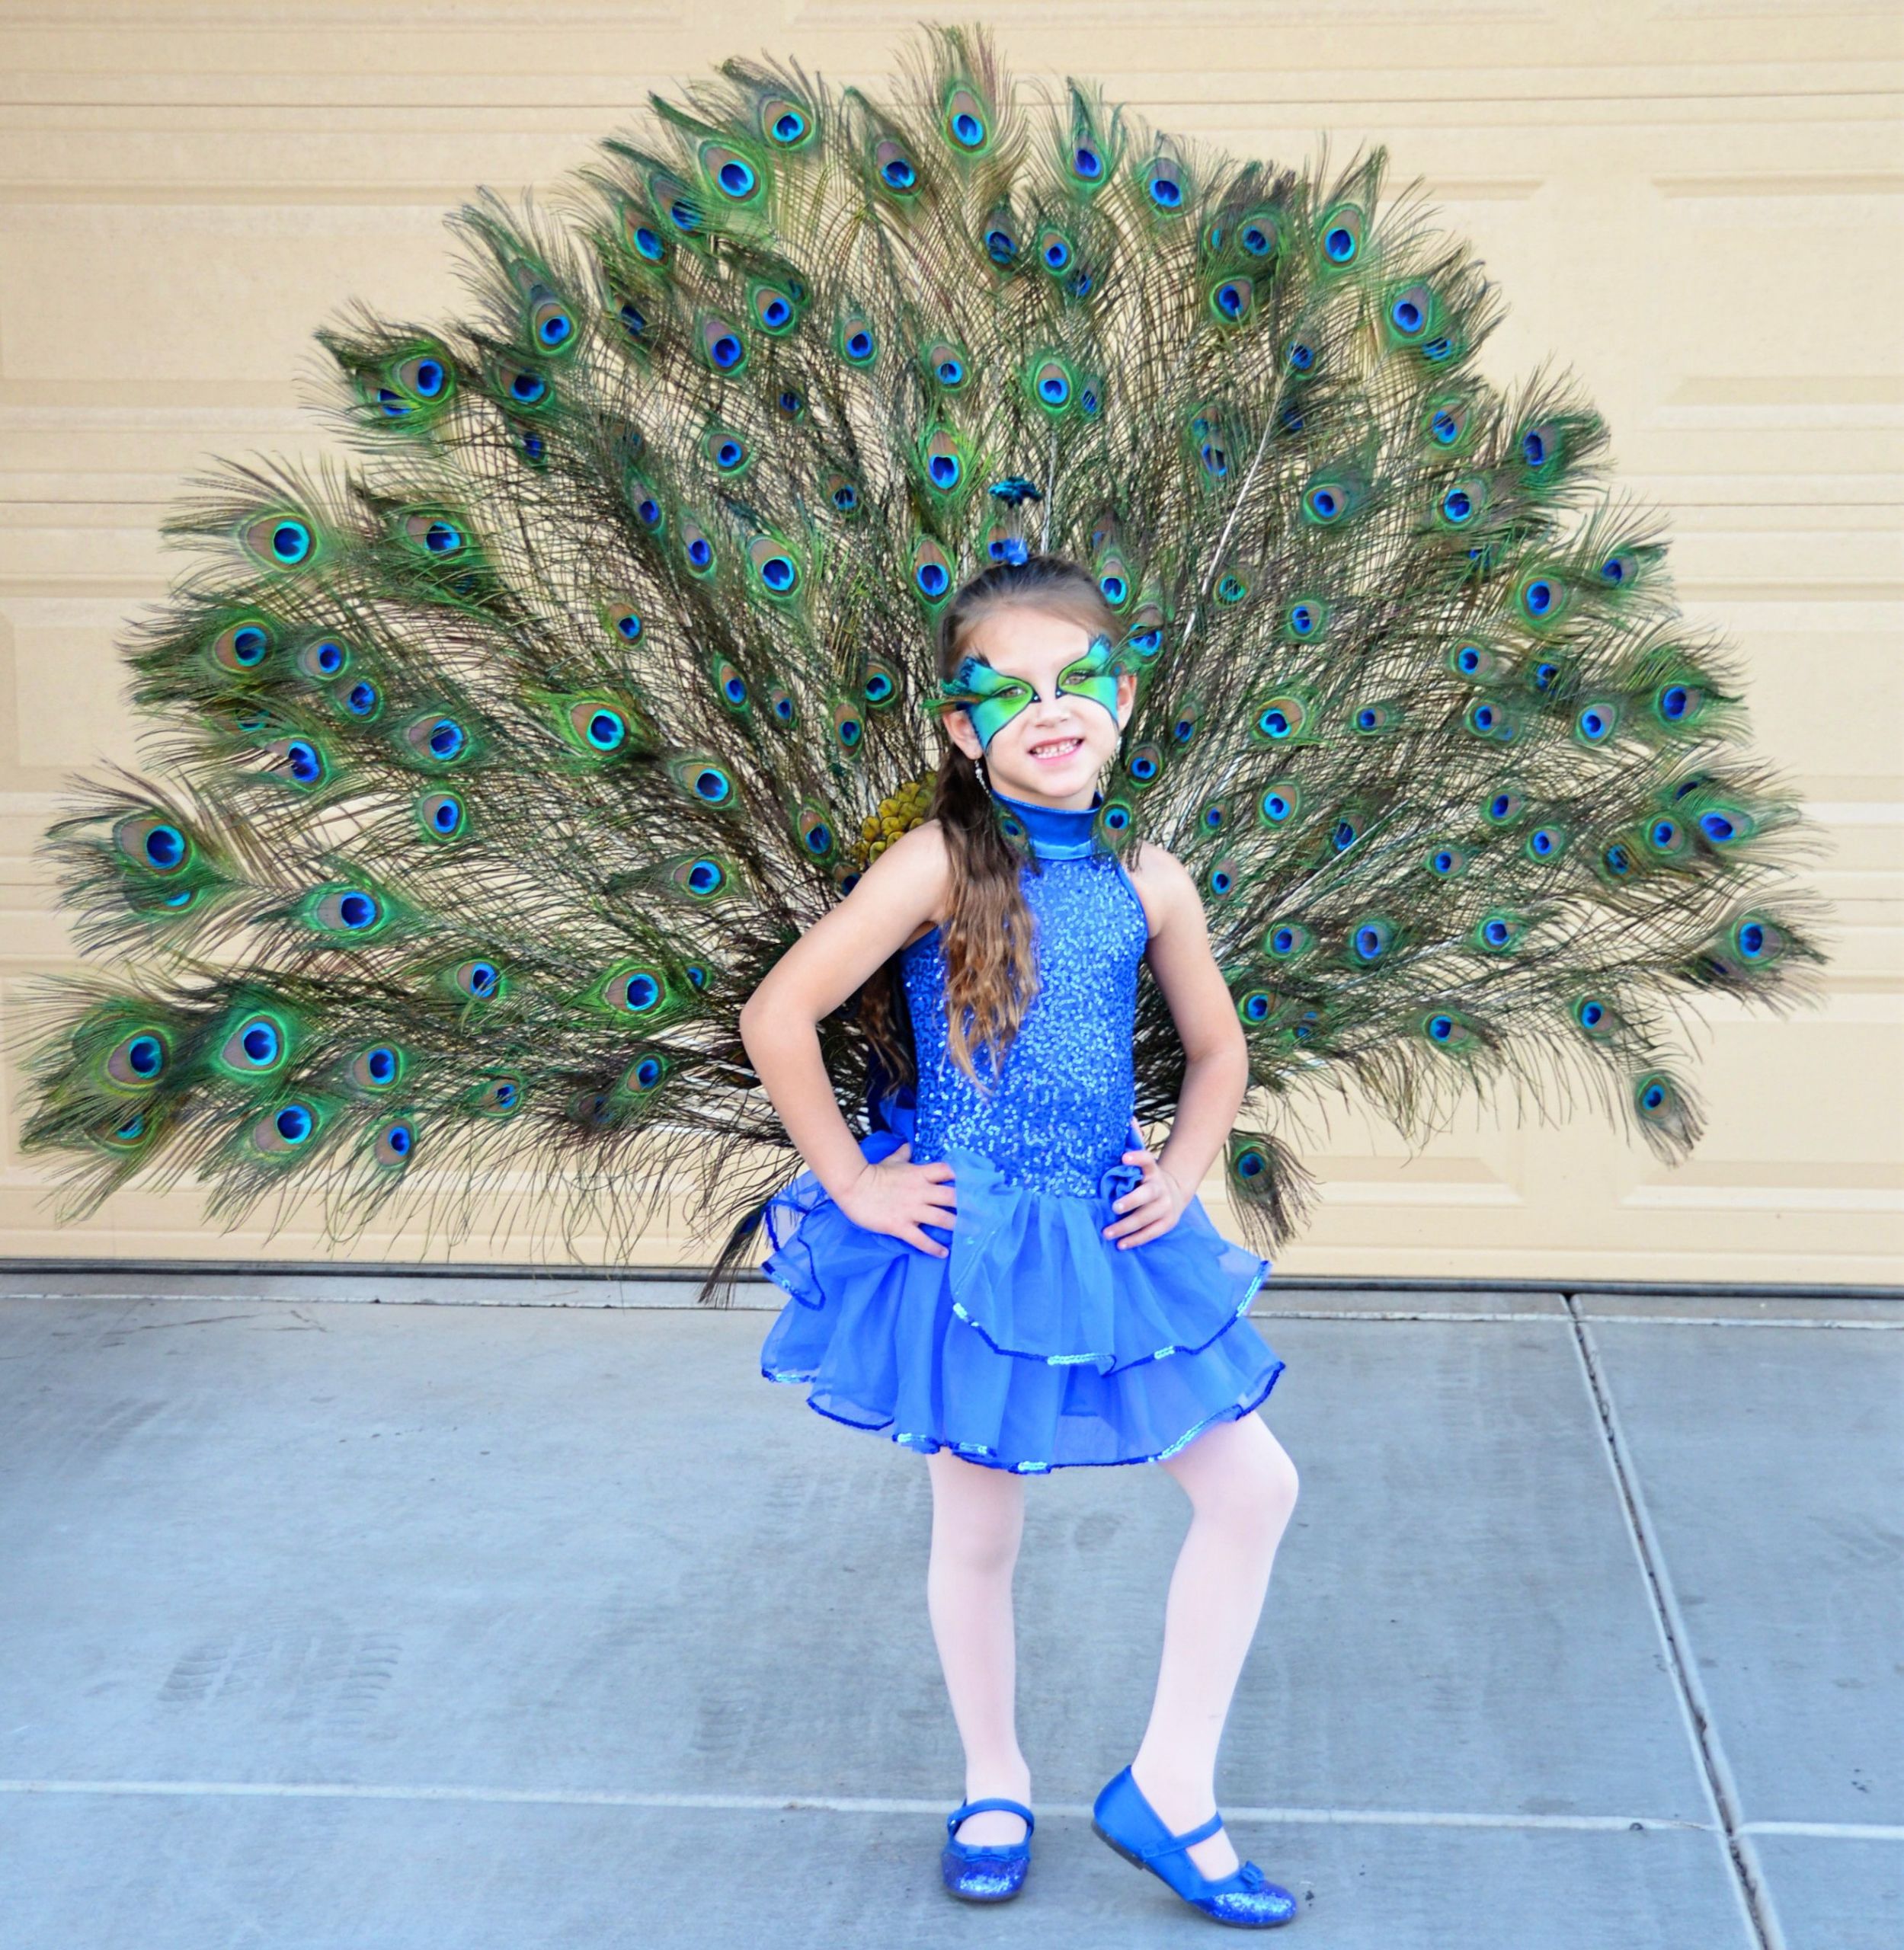 Peacock Costume DIY Kids
 Pretty Peacock Instructions to make your own are here